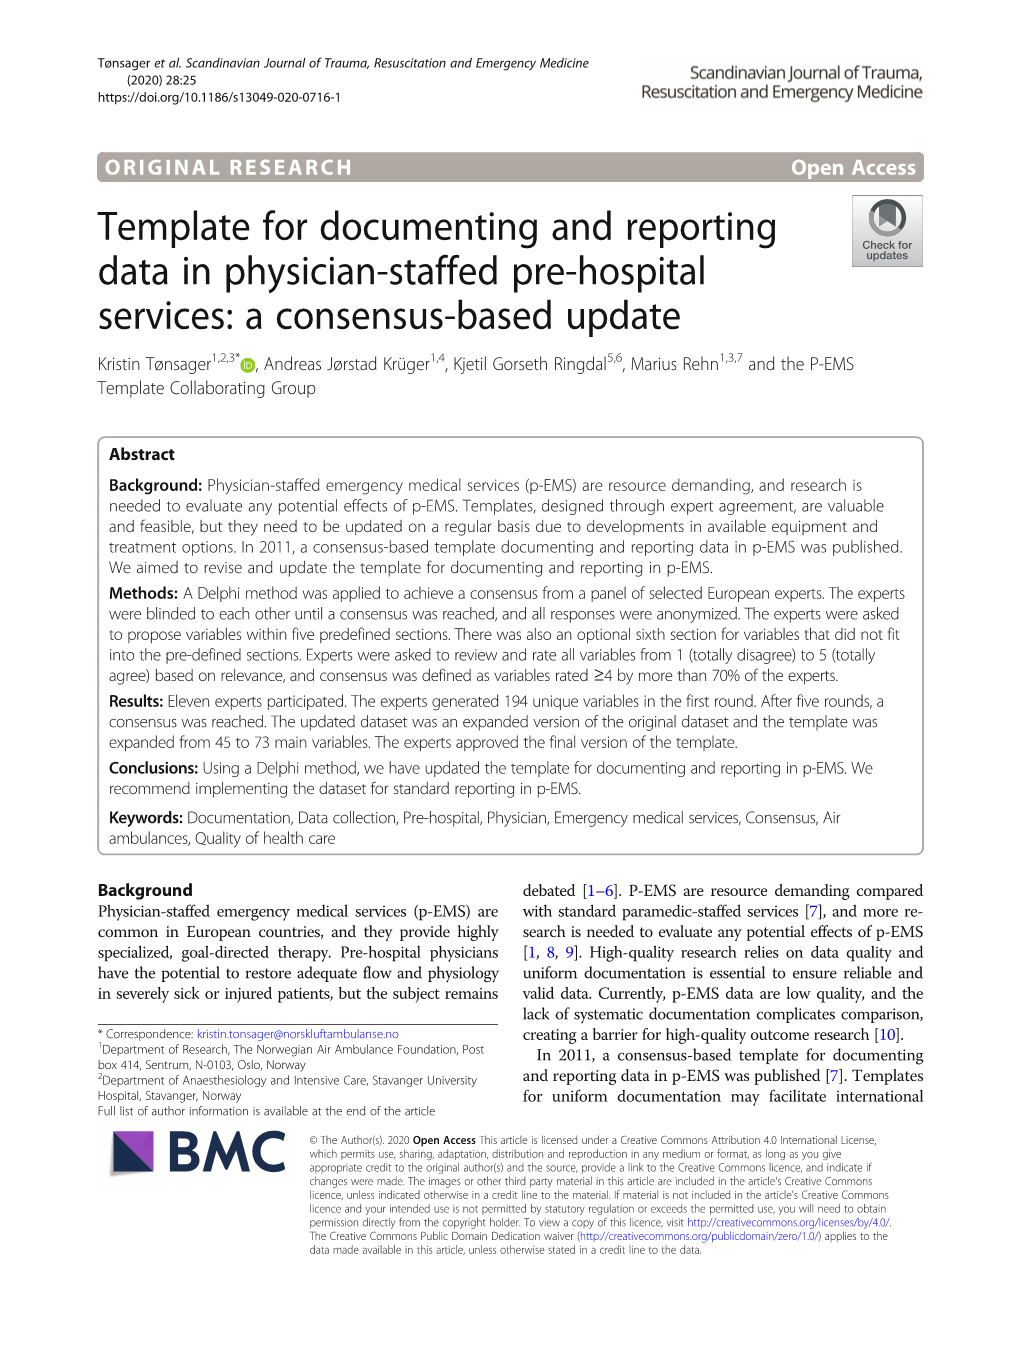 Template for Documenting and Reporting Data in Physician-Staffed